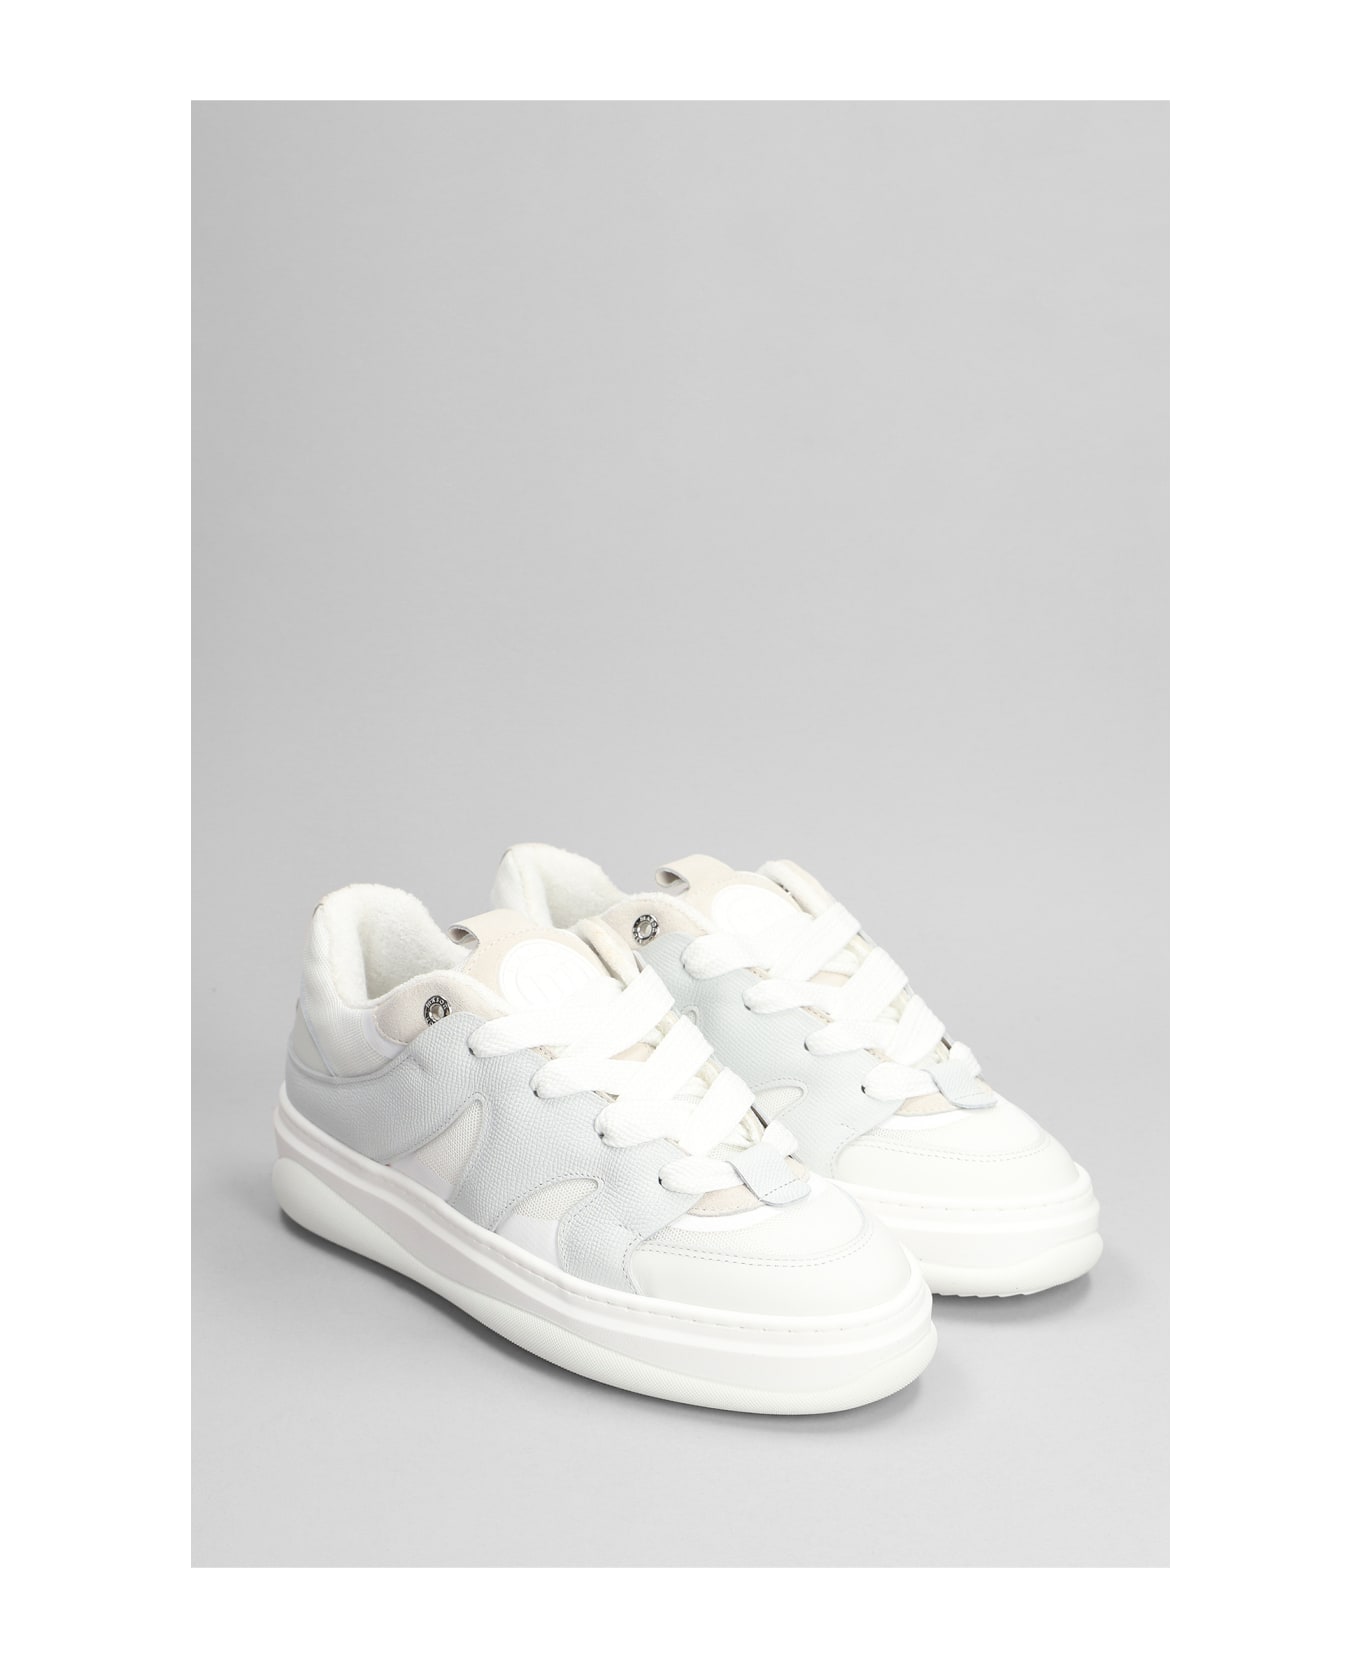 Mason Garments Venice Sneakers In White Suede And Fabric - white スニーカー